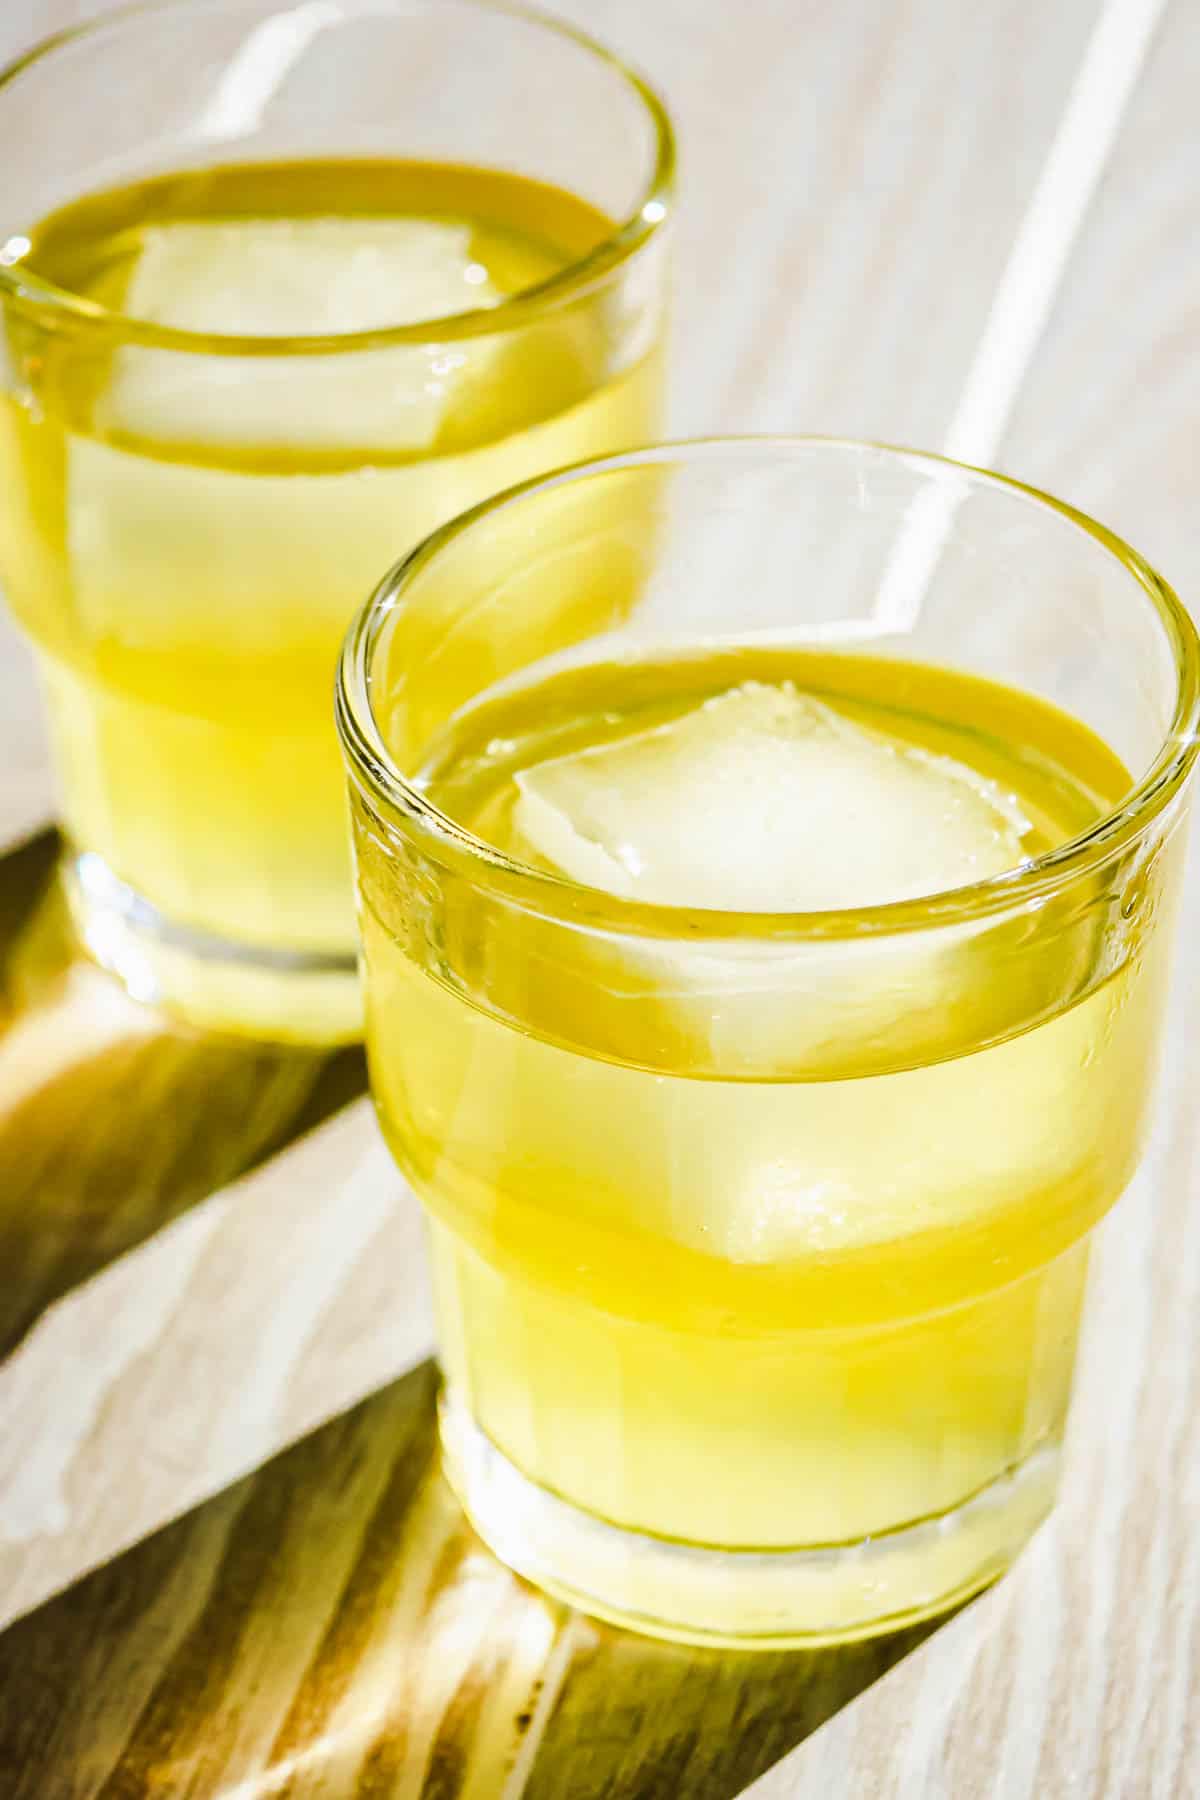 How to Make Homemade Limoncello: A Complete Guide